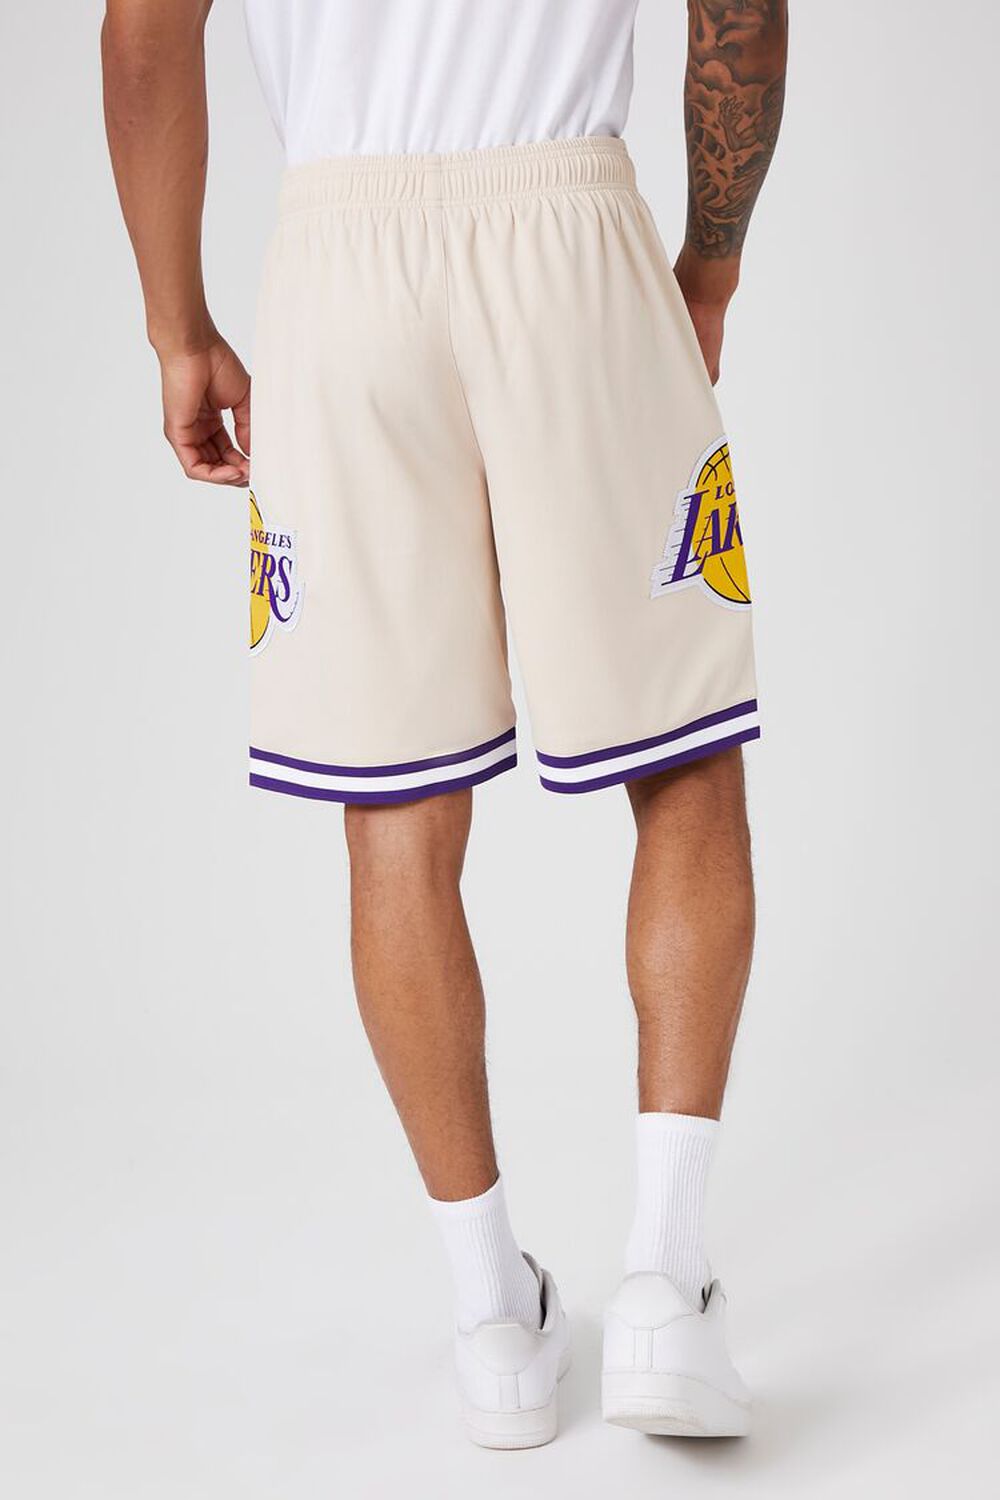 forever 21 lakers shorts